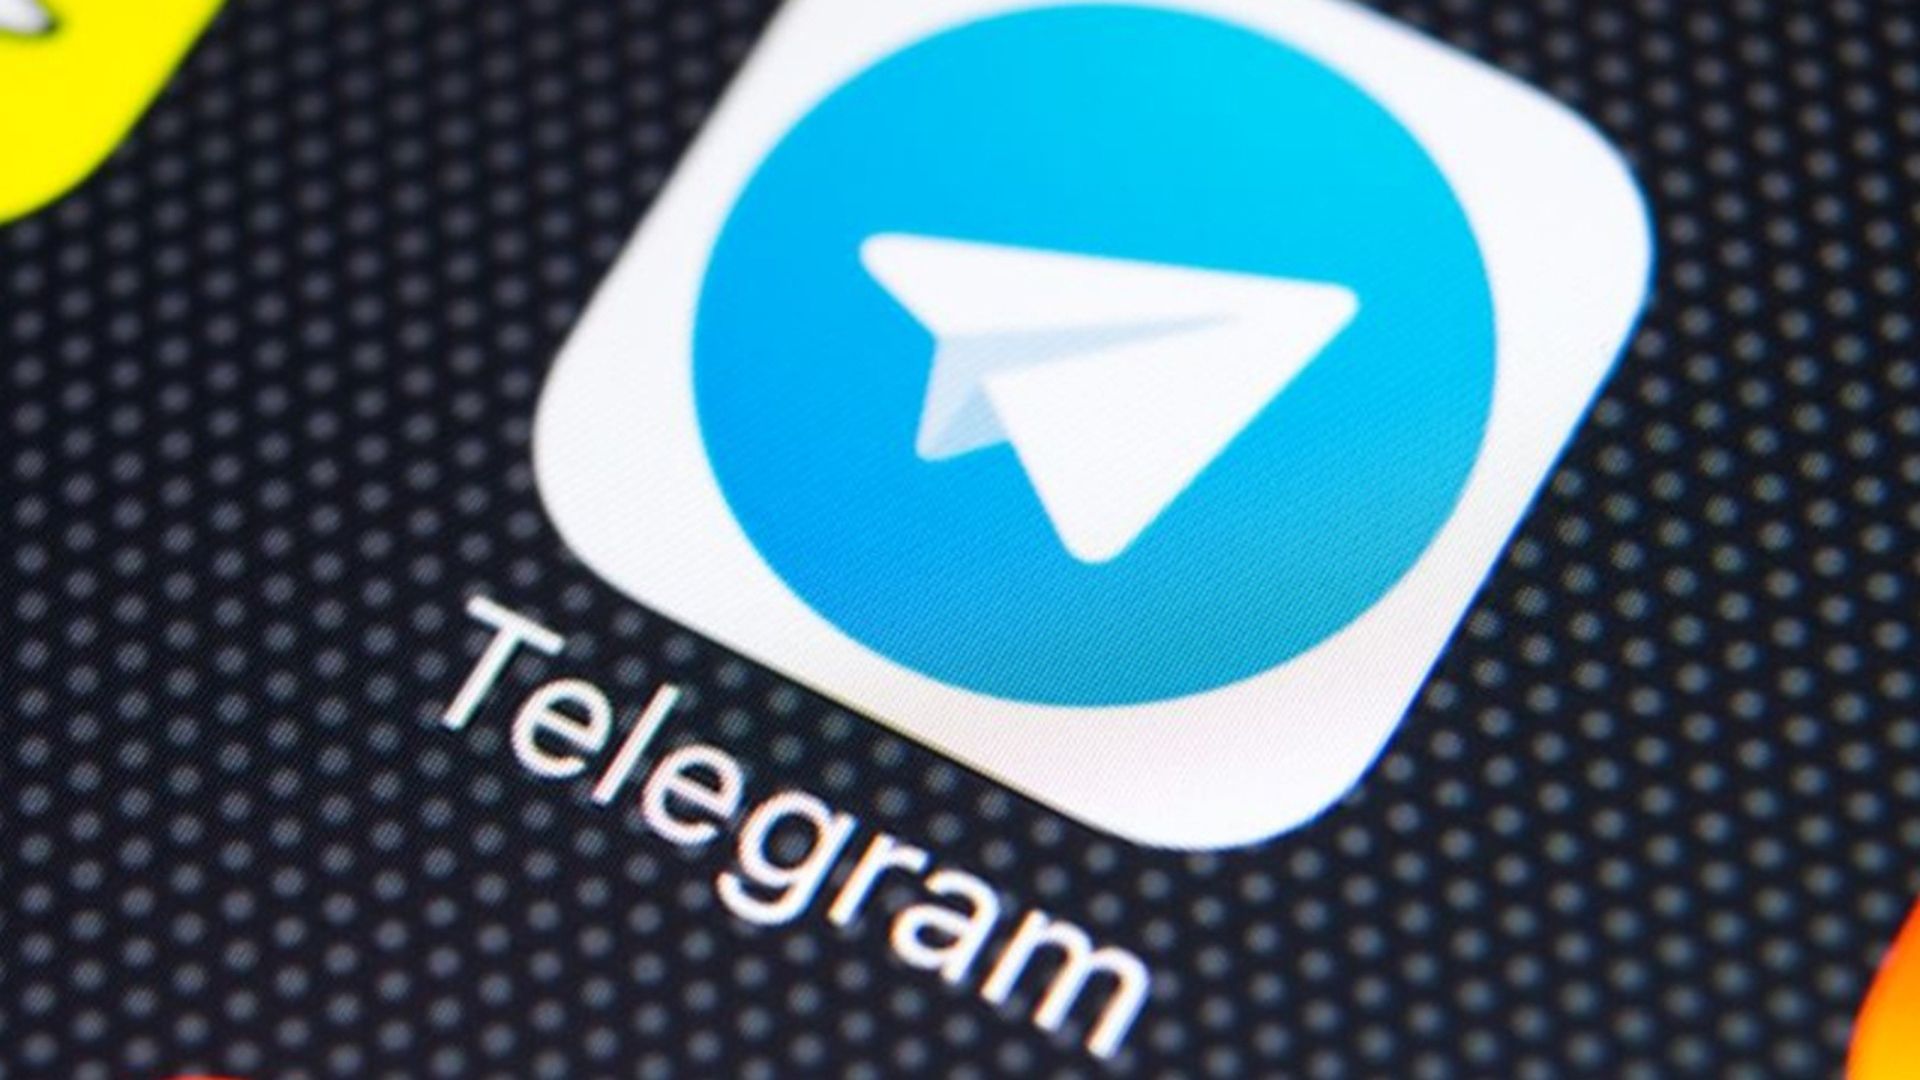 With the latest update, the popular messaging app introduced many new features Telegram Premium gifting option and more.